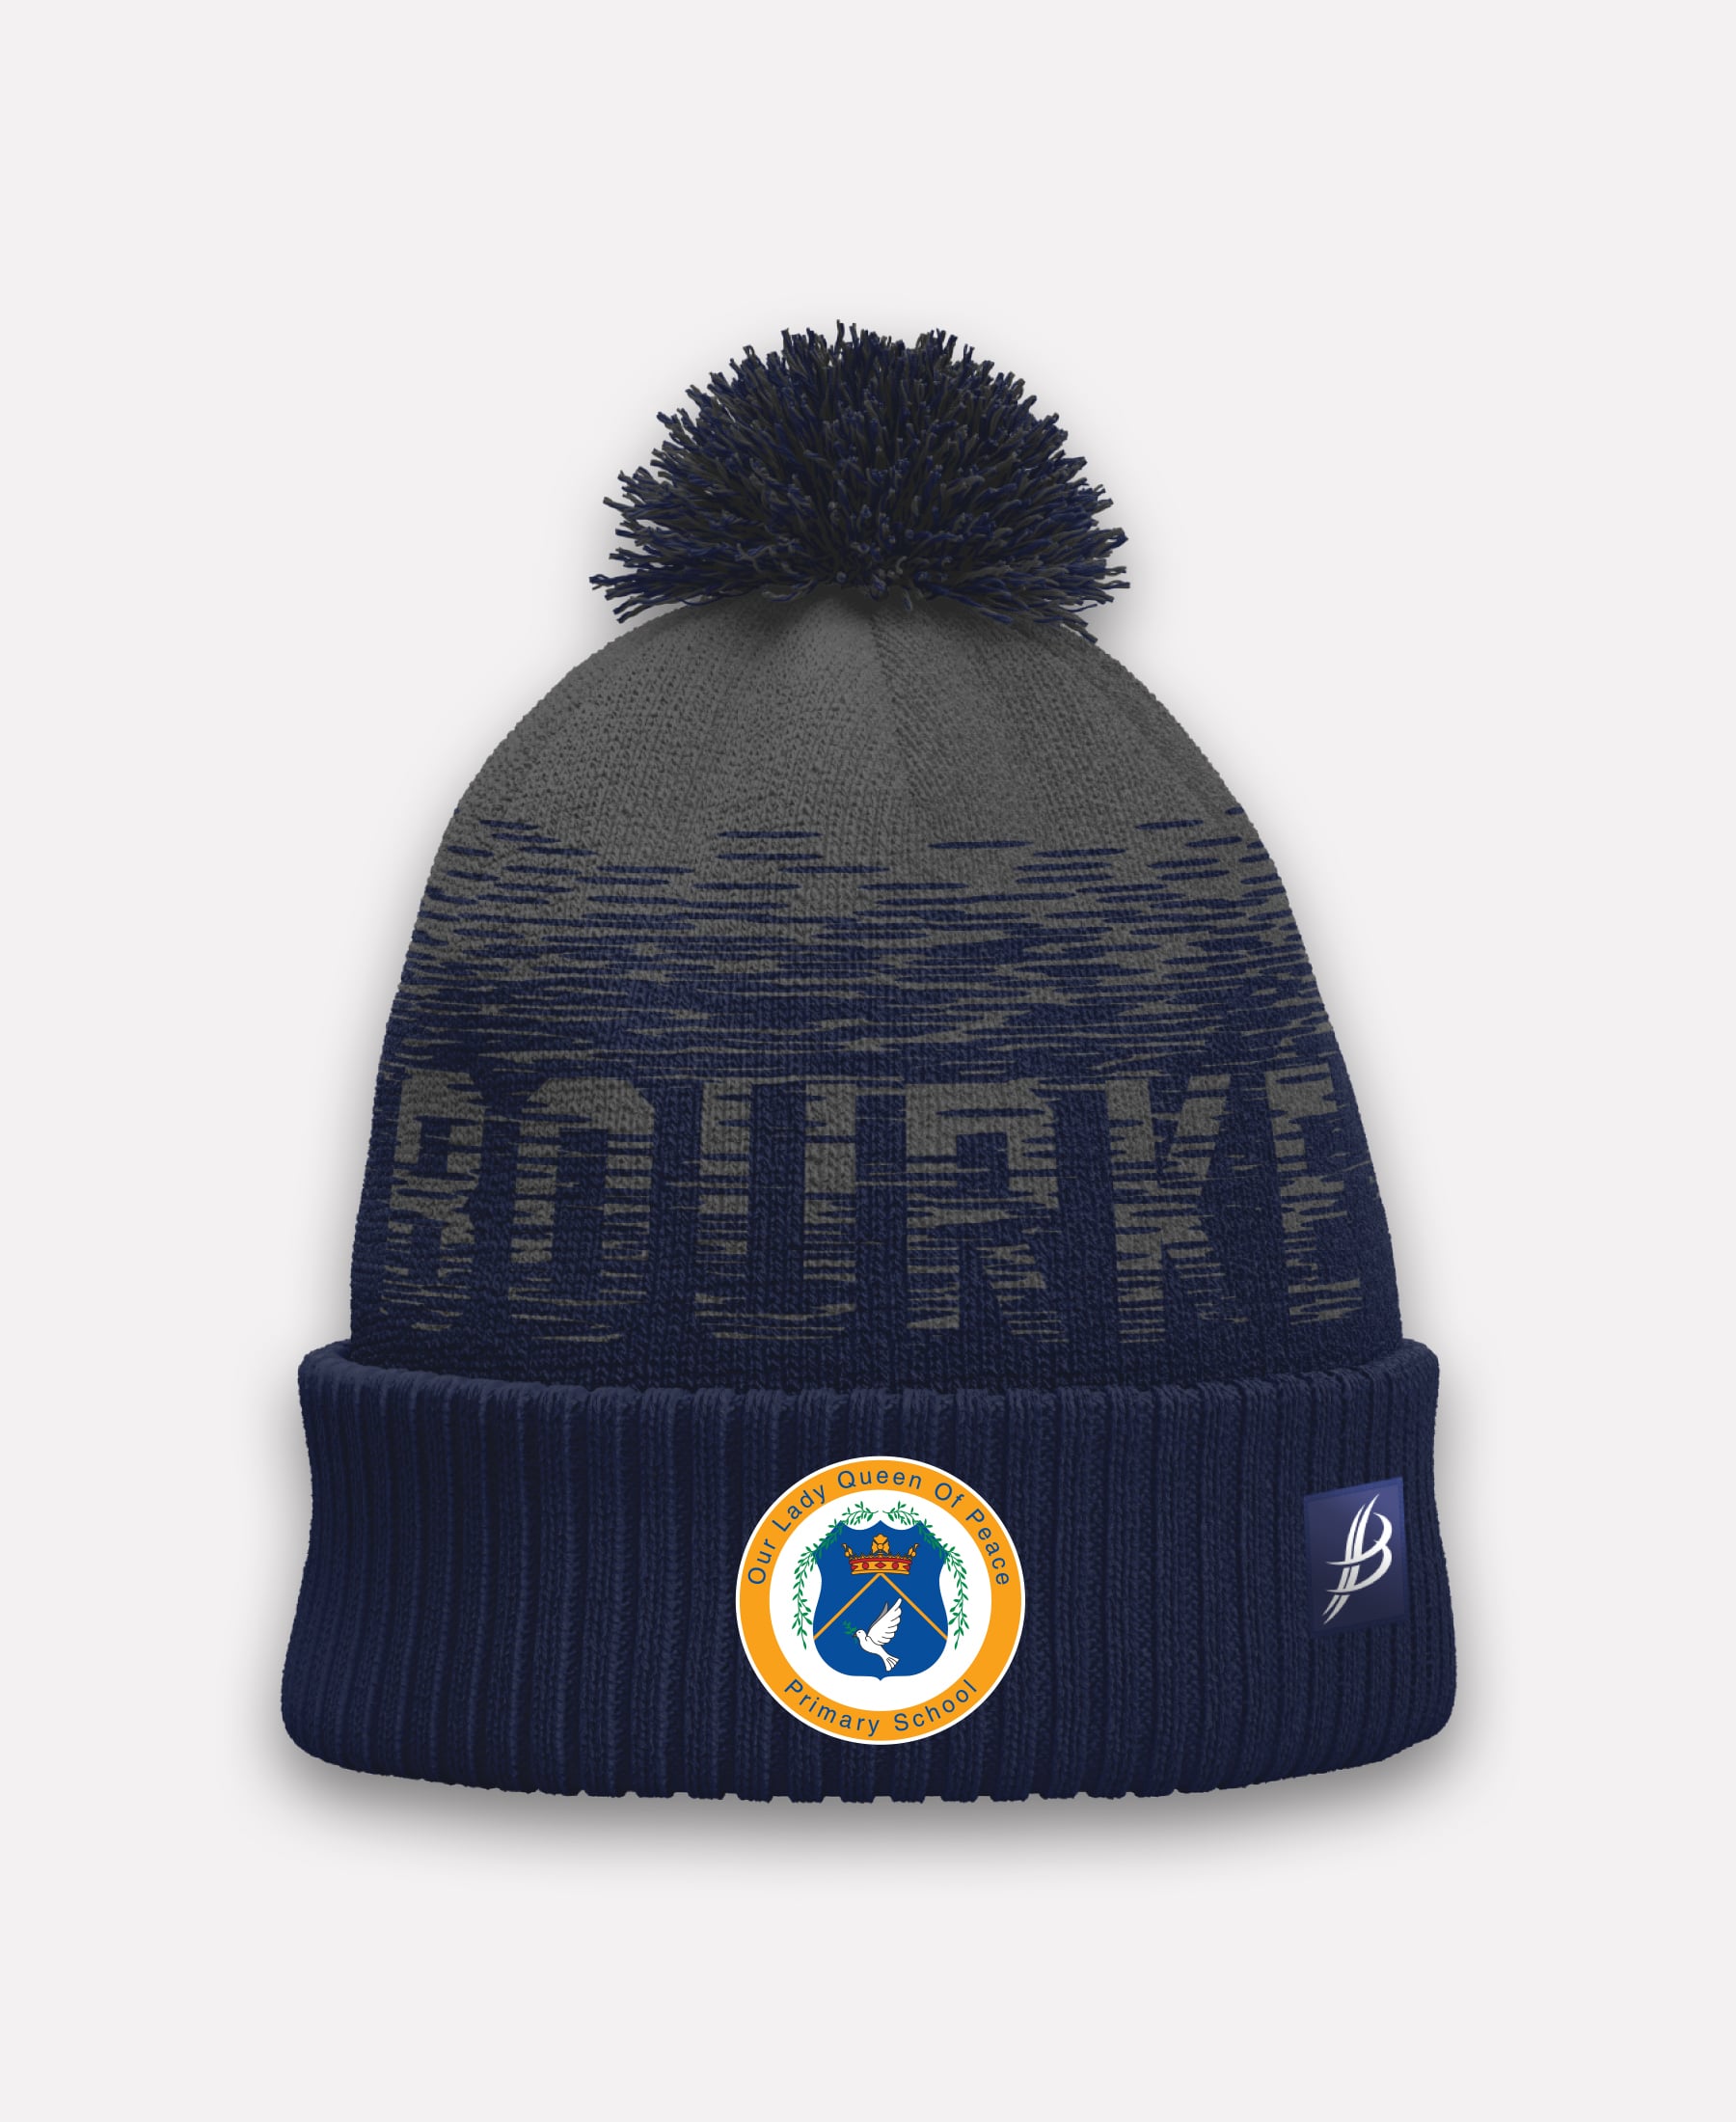 Our Lady Queen Of Peace TACA Fleece Lined Bobble Hat (Navy/Grey)